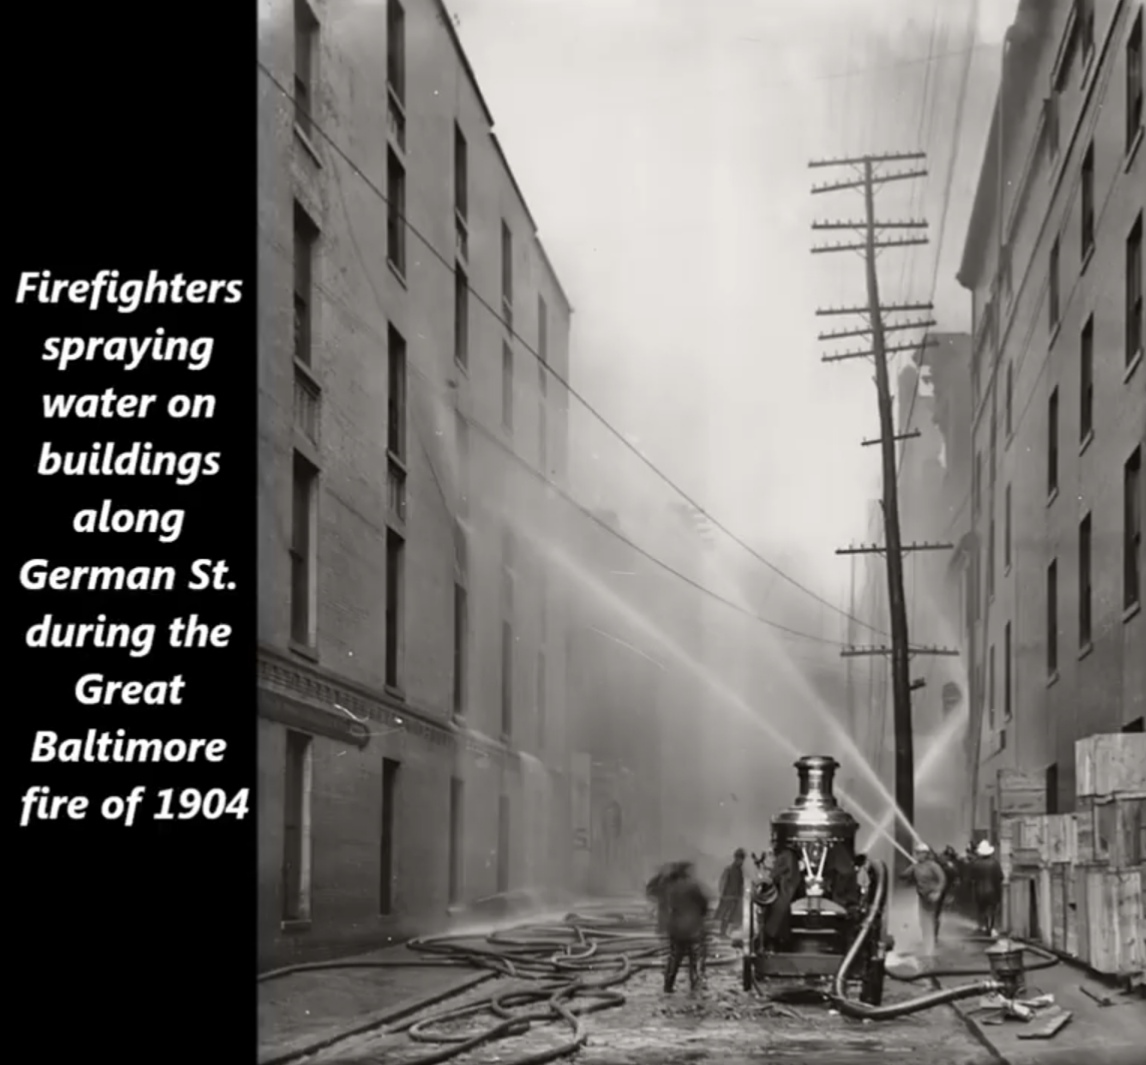 monochrome photography - Firefighters spraying water on buildings along German St. during the Great Baltimore fire of 1904